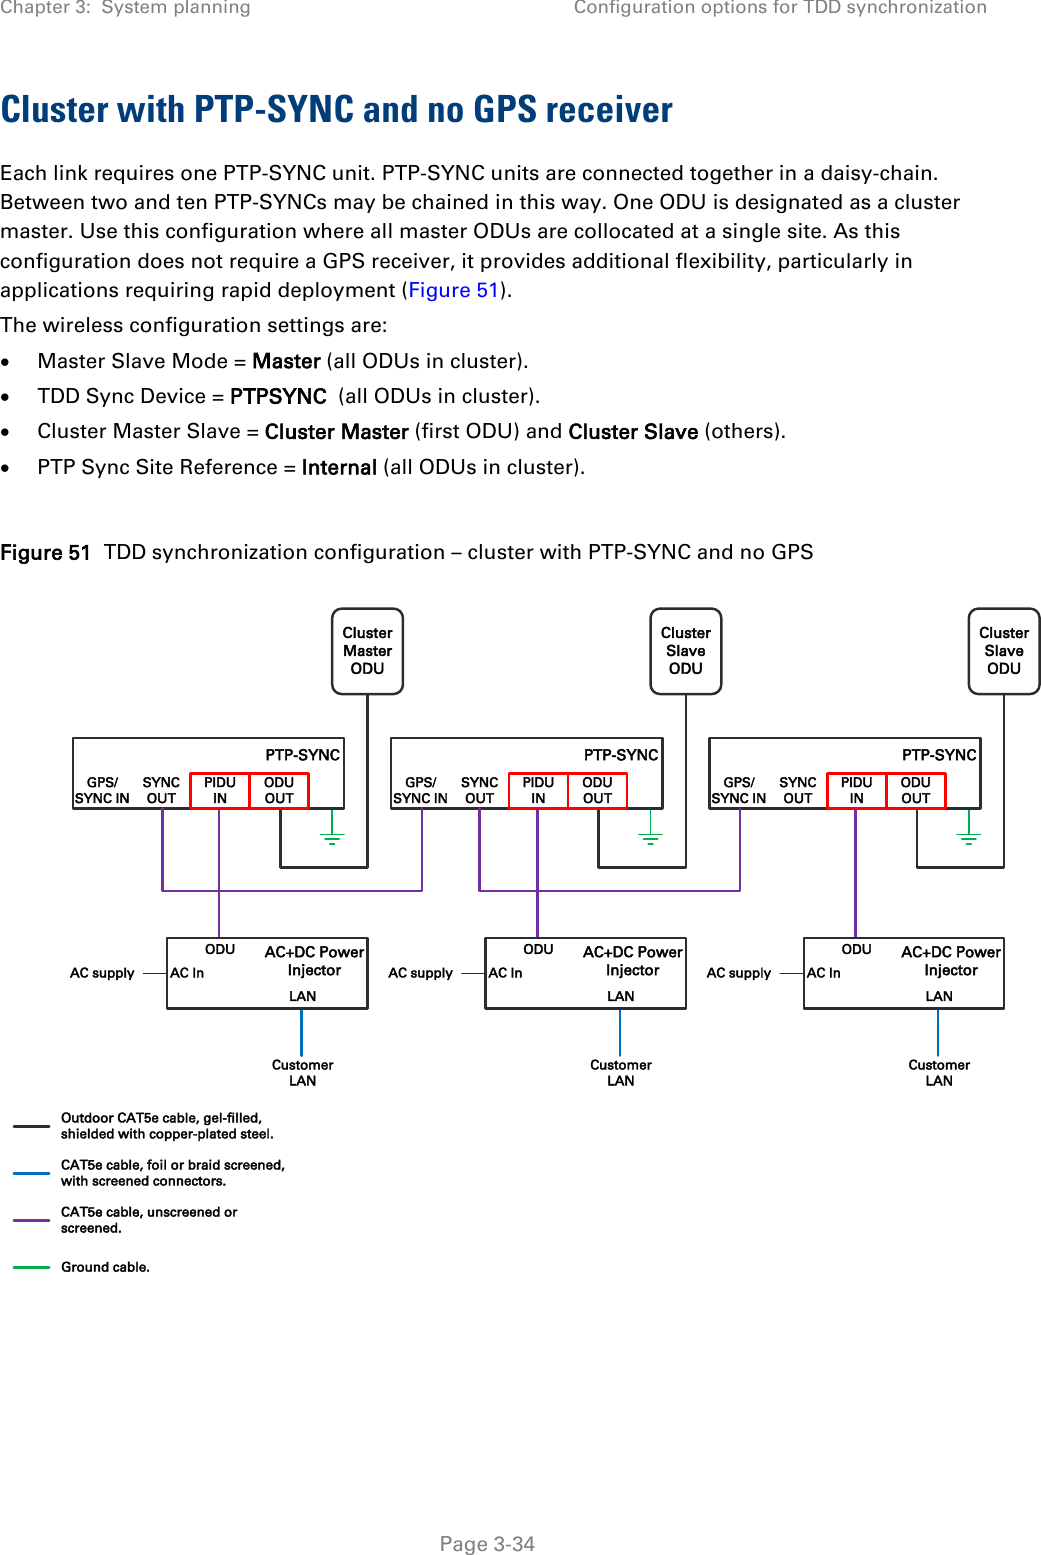 Chapter 3:  System planning Configuration options for TDD synchronization  Cluster with PTP-SYNC and no GPS receiver Each link requires one PTP-SYNC unit. PTP-SYNC units are connected together in a daisy-chain. Between two and ten PTP-SYNCs may be chained in this way. One ODU is designated as a cluster master. Use this configuration where all master ODUs are collocated at a single site. As this configuration does not require a GPS receiver, it provides additional flexibility, particularly in applications requiring rapid deployment (Figure 51). The wireless configuration settings are: • Master Slave Mode = Master (all ODUs in cluster). • TDD Sync Device = PTPSYNC  (all ODUs in cluster). • Cluster Master Slave = Cluster Master (first ODU) and Cluster Slave (others). • PTP Sync Site Reference = Internal (all ODUs in cluster).  Figure 51  TDD synchronization configuration – cluster with PTP-SYNC and no GPS     ClusterMasterODUPTP-SYNCGPS/SYNC INSYNCOUTPIDUINODUOUTODULANAC+DC PowerInjectorAC InCustomerLANAC supplyOutdoor CAT5e cable, gel-filled, shielded with copper-plated steel.CAT5e cable, foil or braid screened, with screened connectors.CAT5e cable, unscreened or screened.Ground cable.ClusterSlaveODUPTP-SYNCGPS/SYNC INSYNCOUTPIDUINODUOUTODULANAC+DC PowerInjectorAC InCustomerLANAC supplyClusterSlaveODUPTP-SYNCGPS/SYNC INSYNCOUTPIDUINODUOUTODULANAC+DC PowerInjectorAC InCustomerLANAC supply Page 3-34 